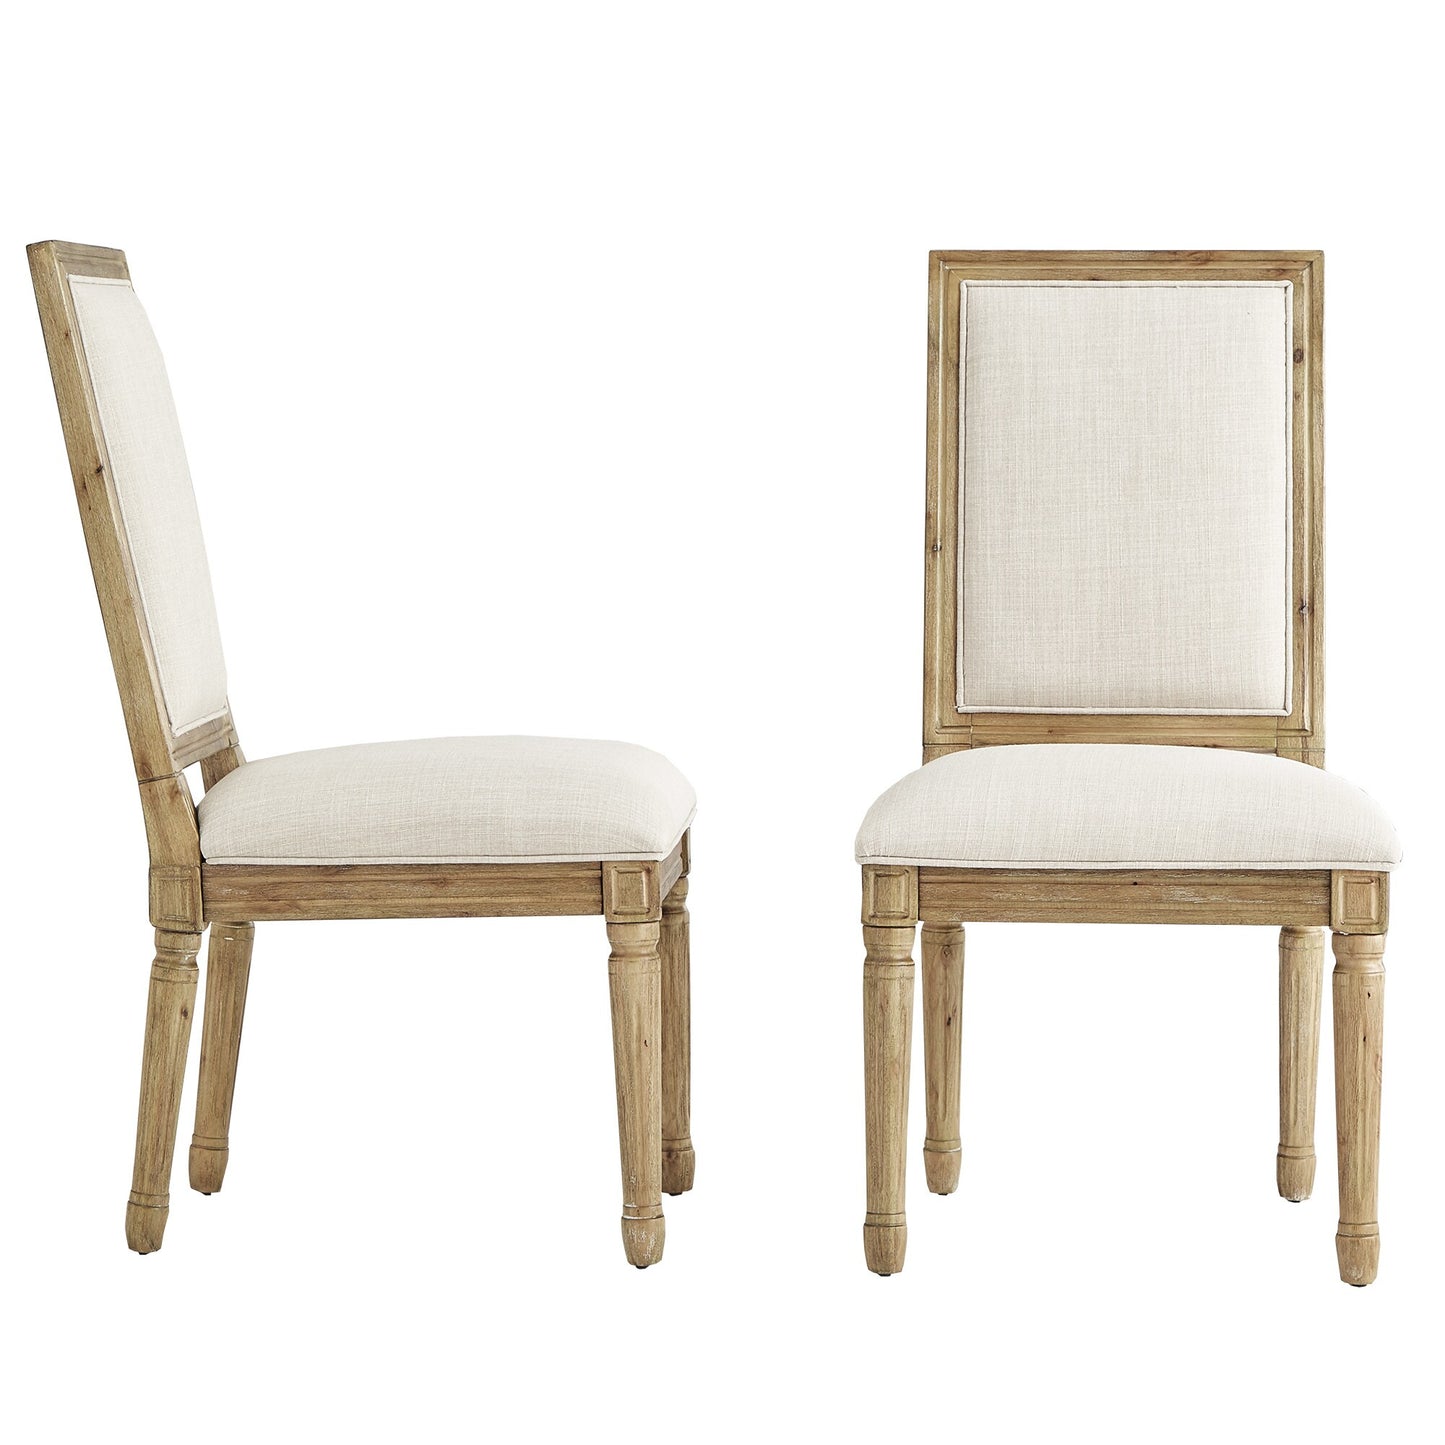 Rectangular Linen and Wood Dining Chairs (Set of 2) - Beige Linen, Natural Finish